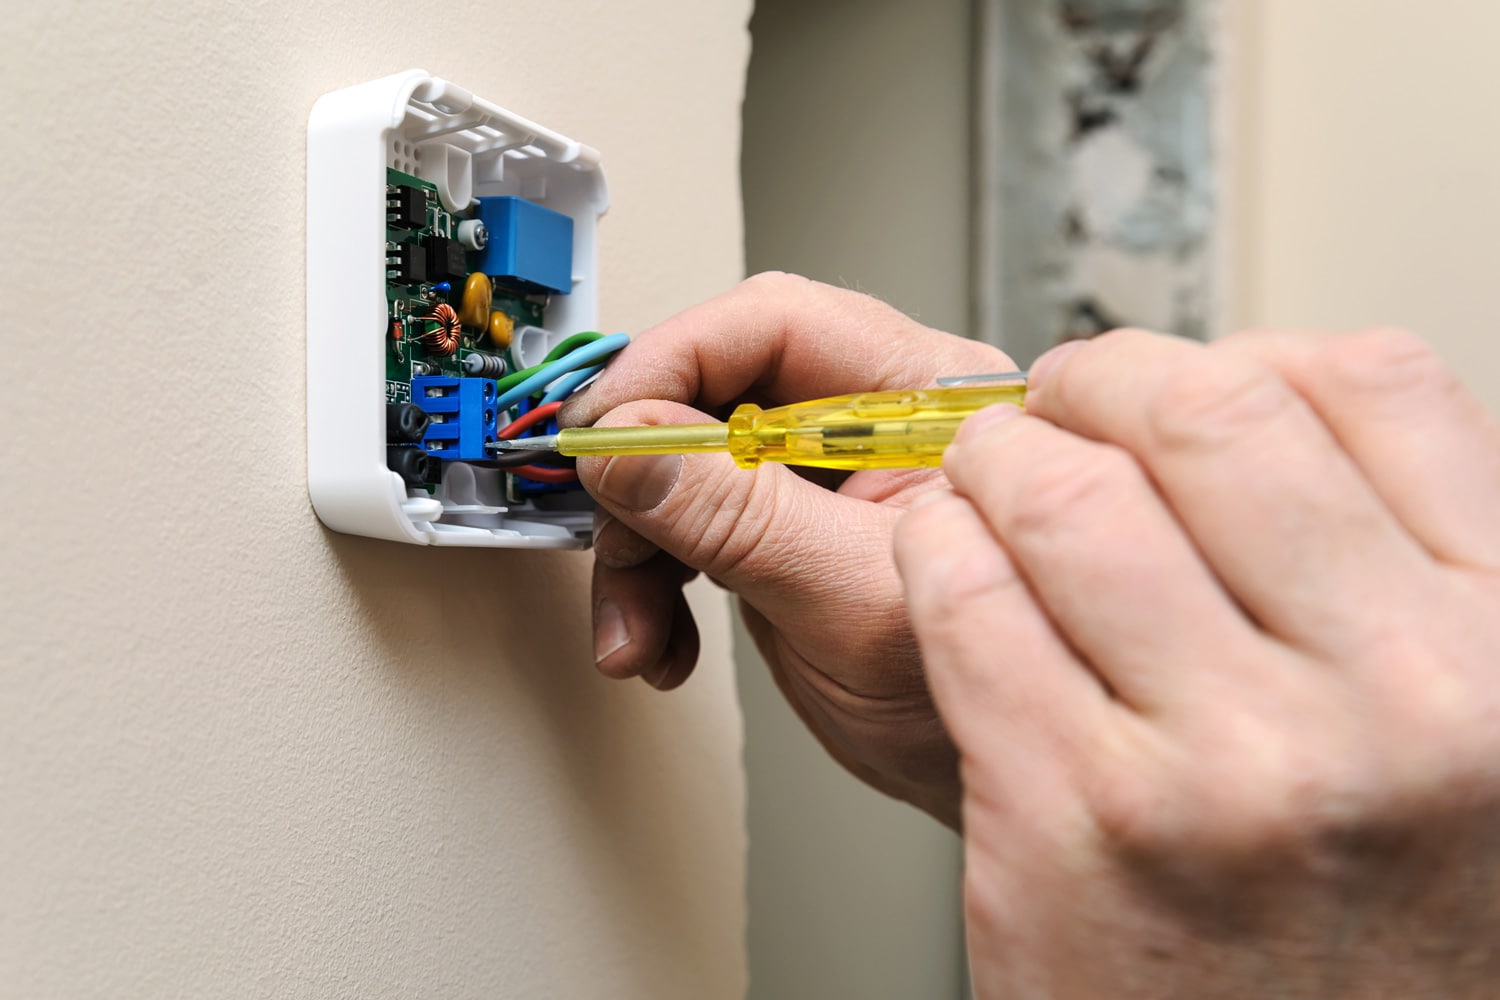 Installing a programmable room thermostat. Man's hands fixing the wires to the terminals and connects the device.